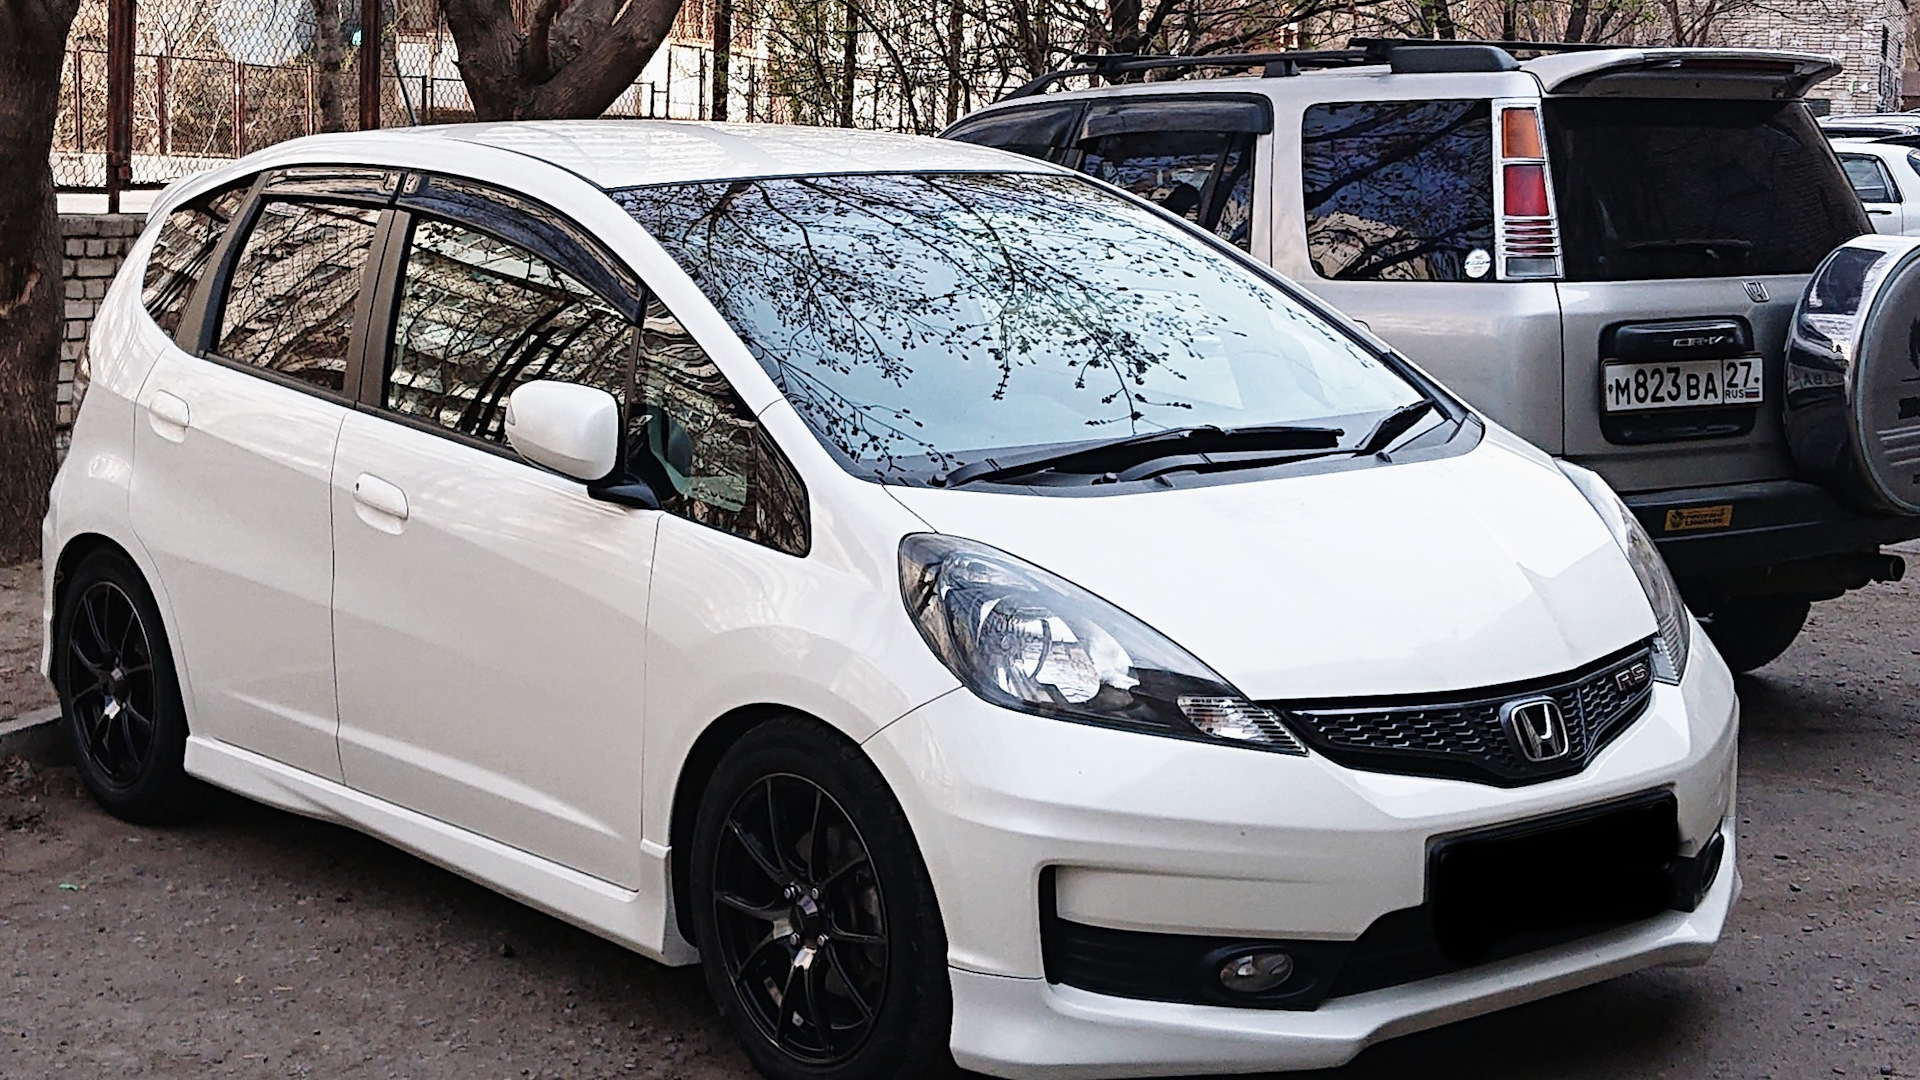 Honda Fit RS ge8. Honda Fit 2 RS. Honda Fit RS 2013. Honda Fit RS 2012.